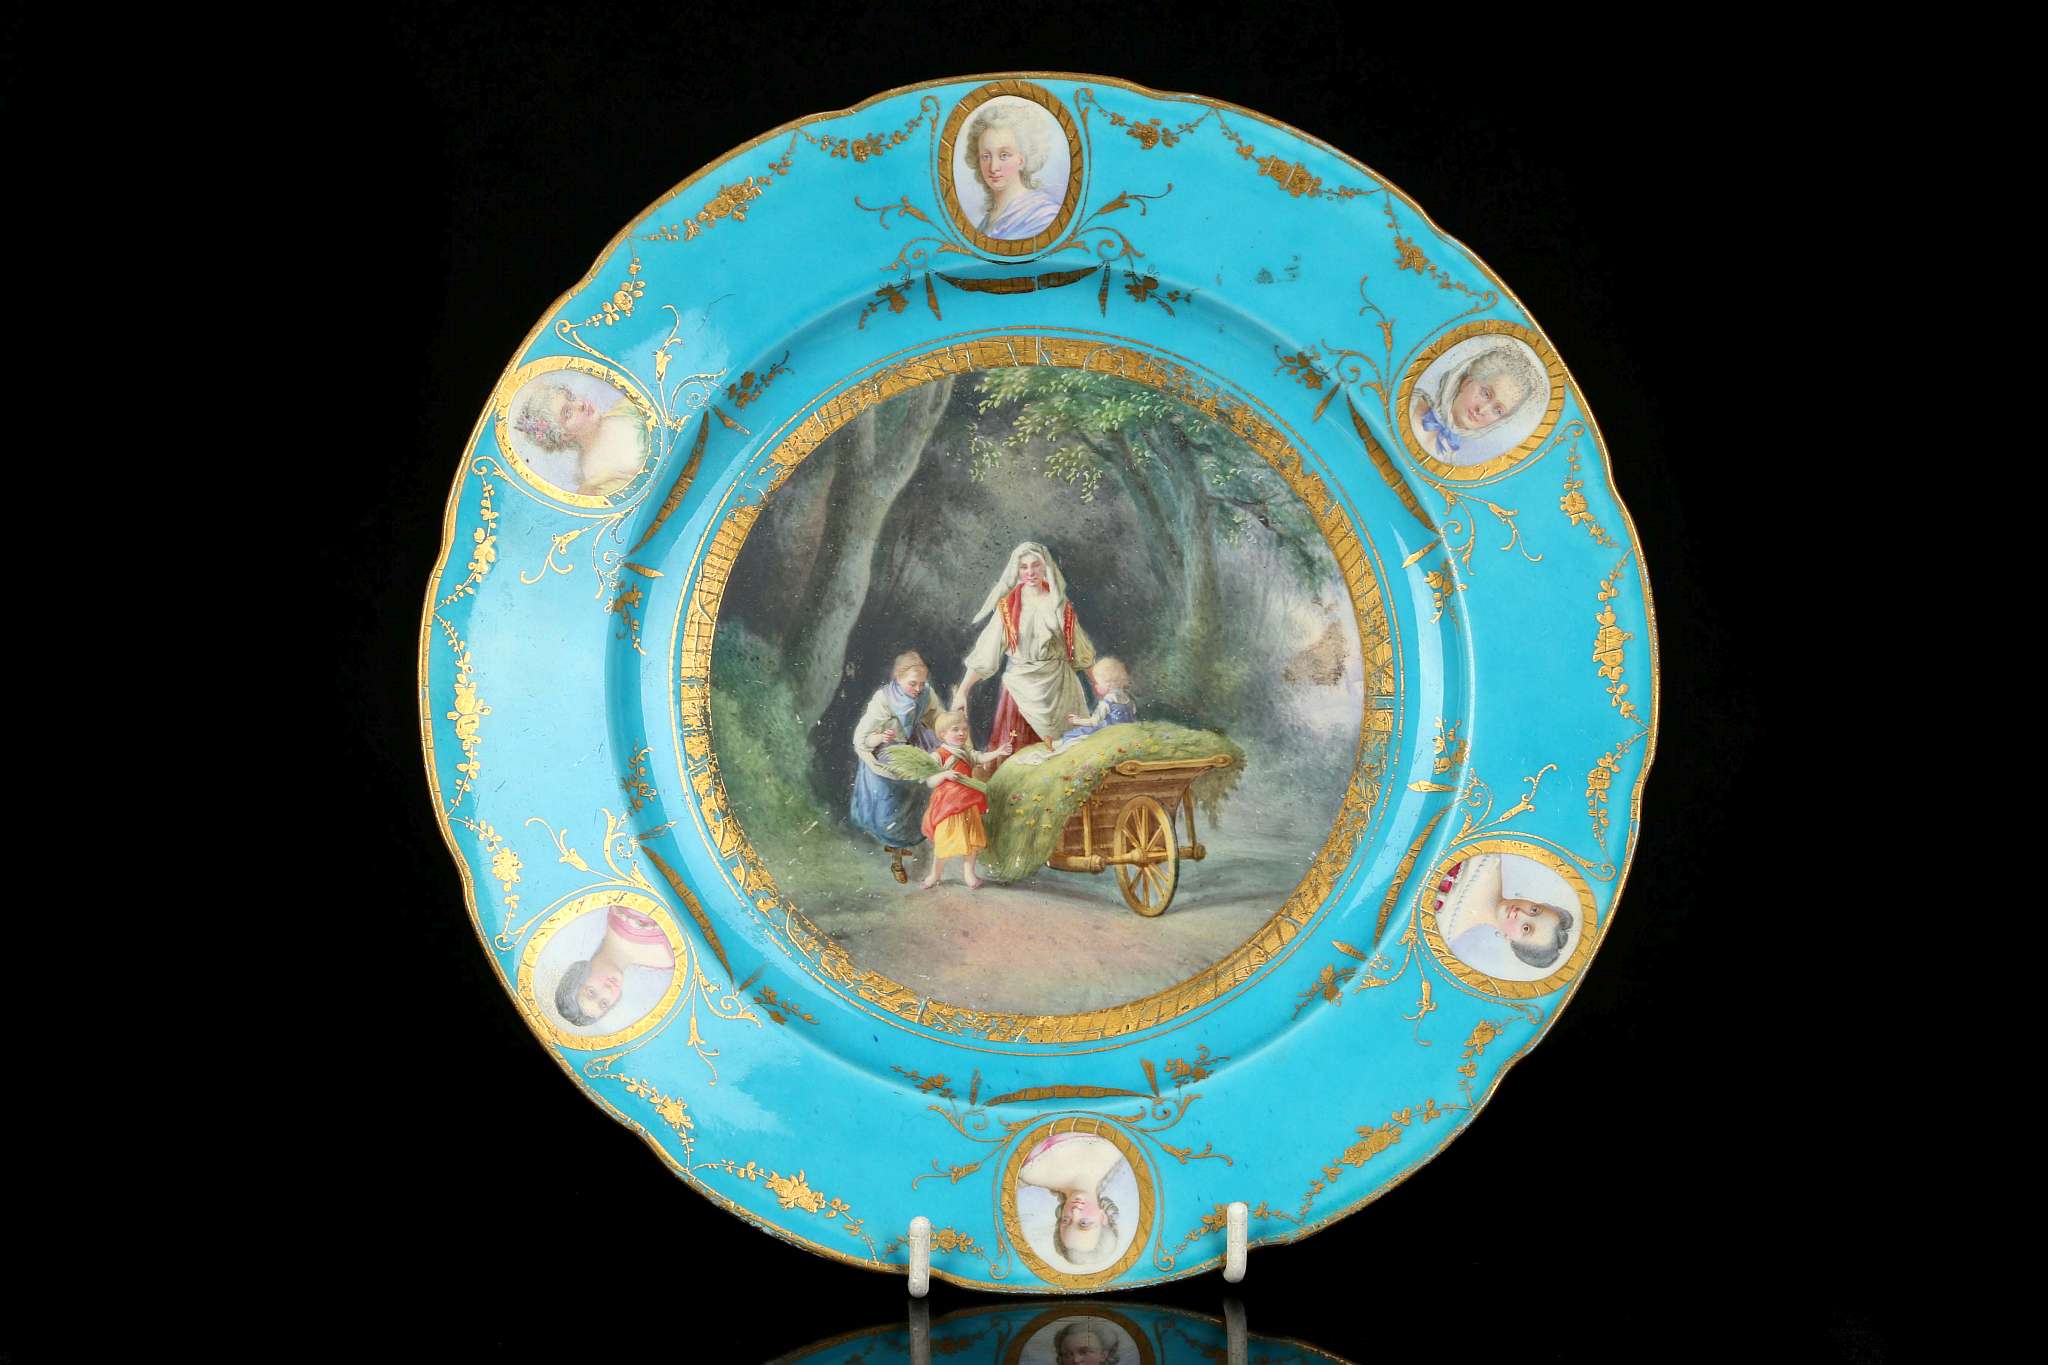 A SEVRES-STYLE CABINET PLATE, late 19th century, finely painted with a scene of a lady pushing a